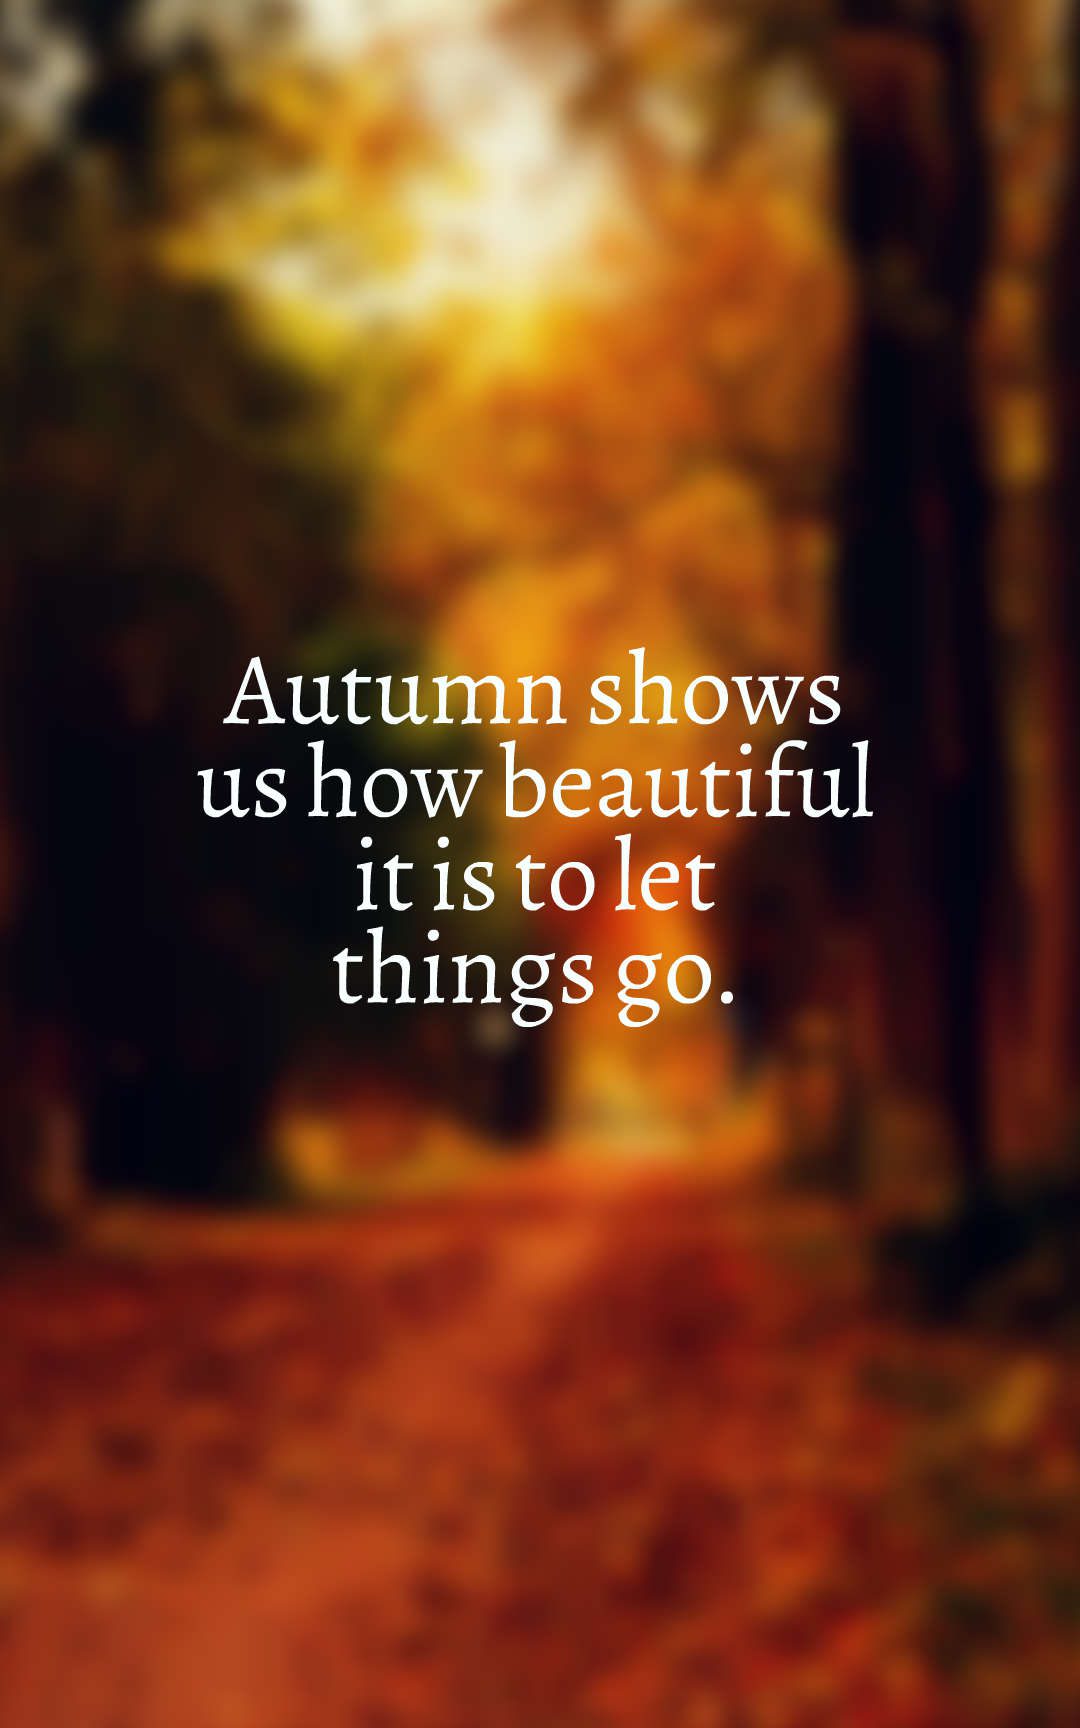 Autumn shows us how beautiful it is to let things go.